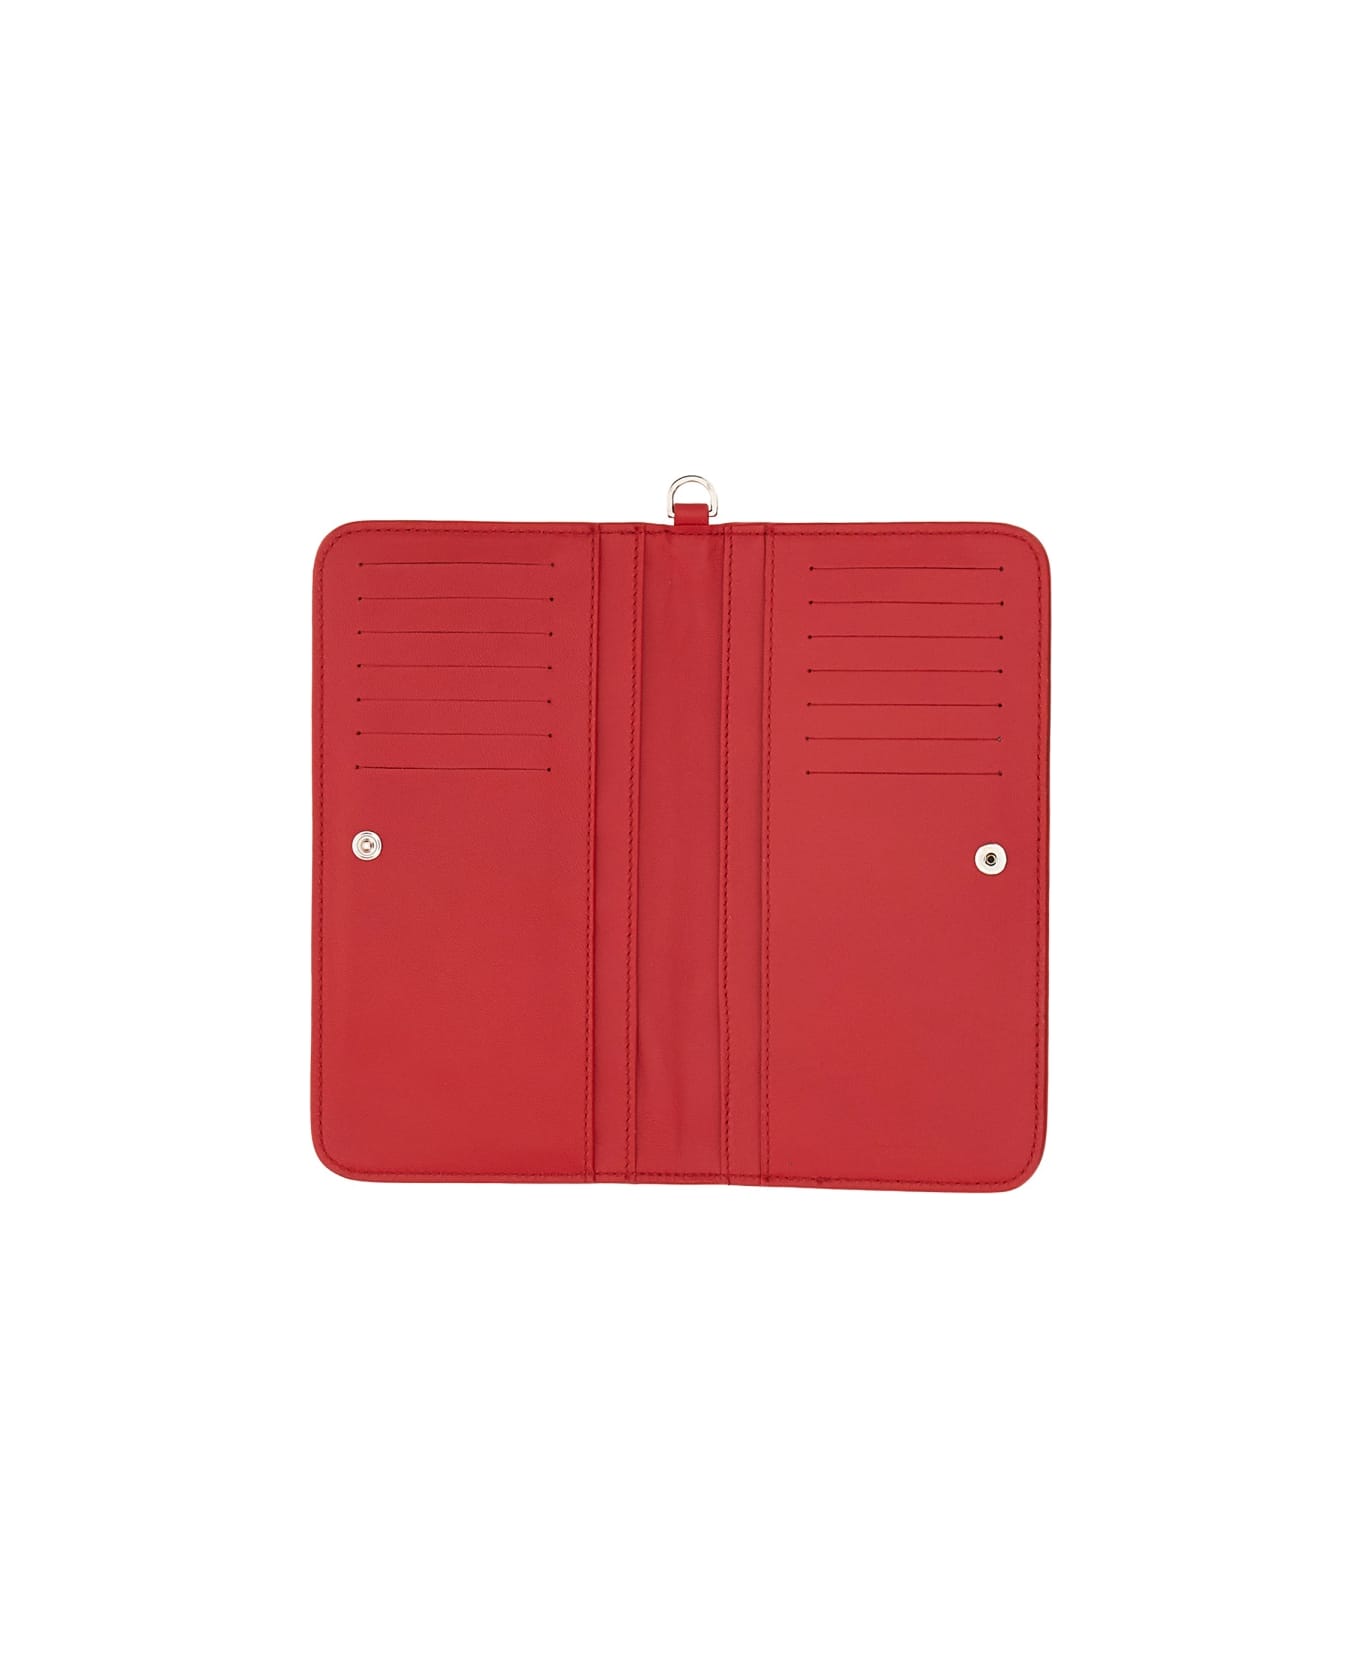 N.21 Wallet With Logo - RED